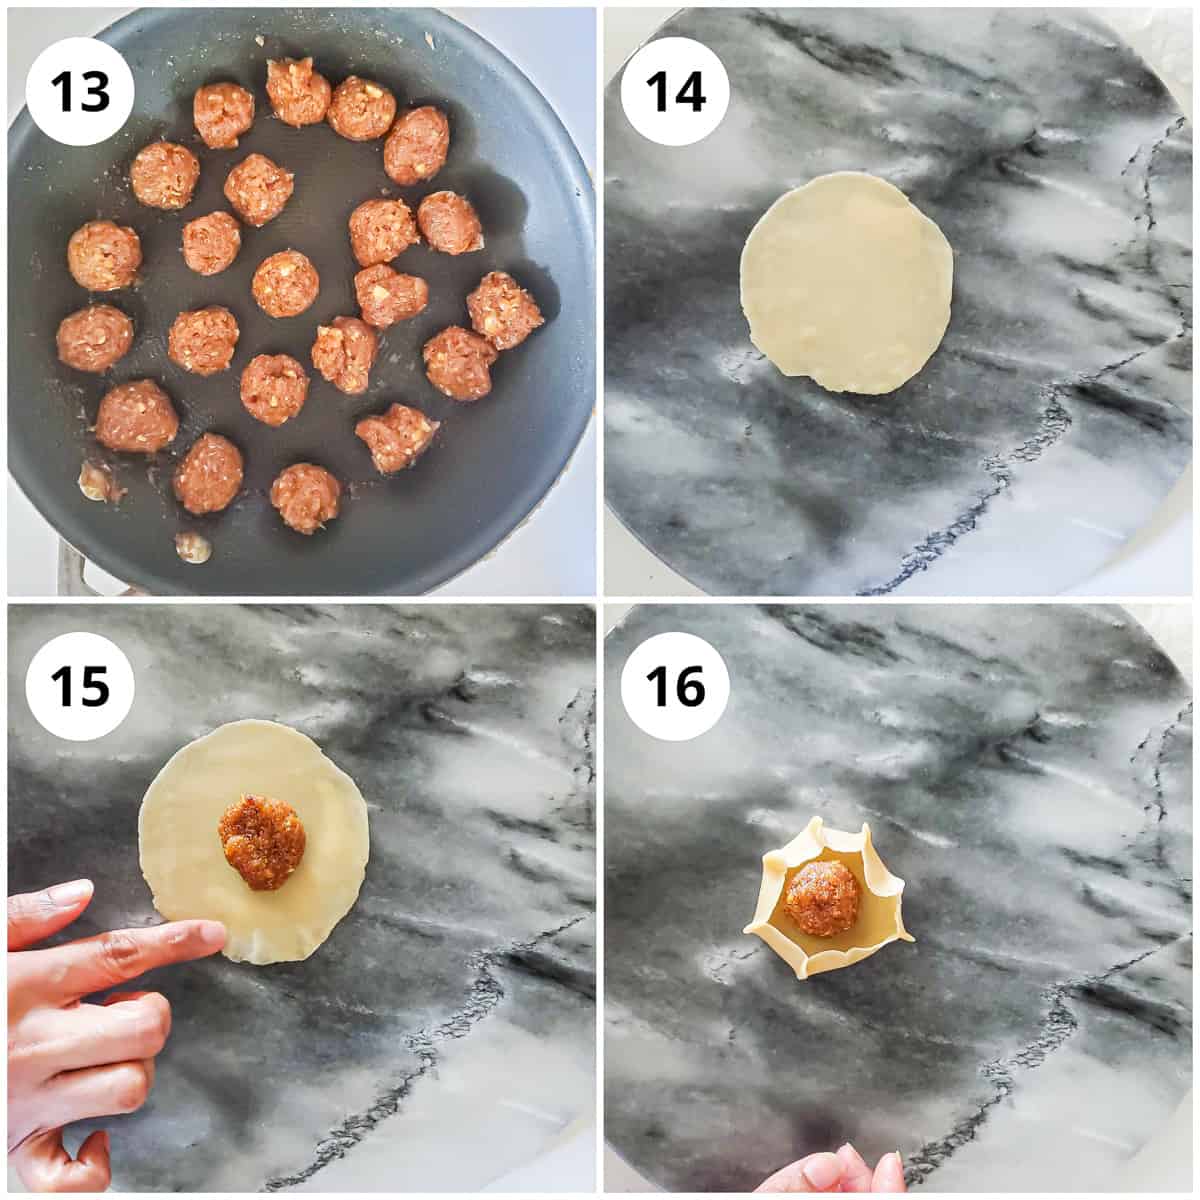 steps for rolling the flour dough ball and fill it with stuffing.